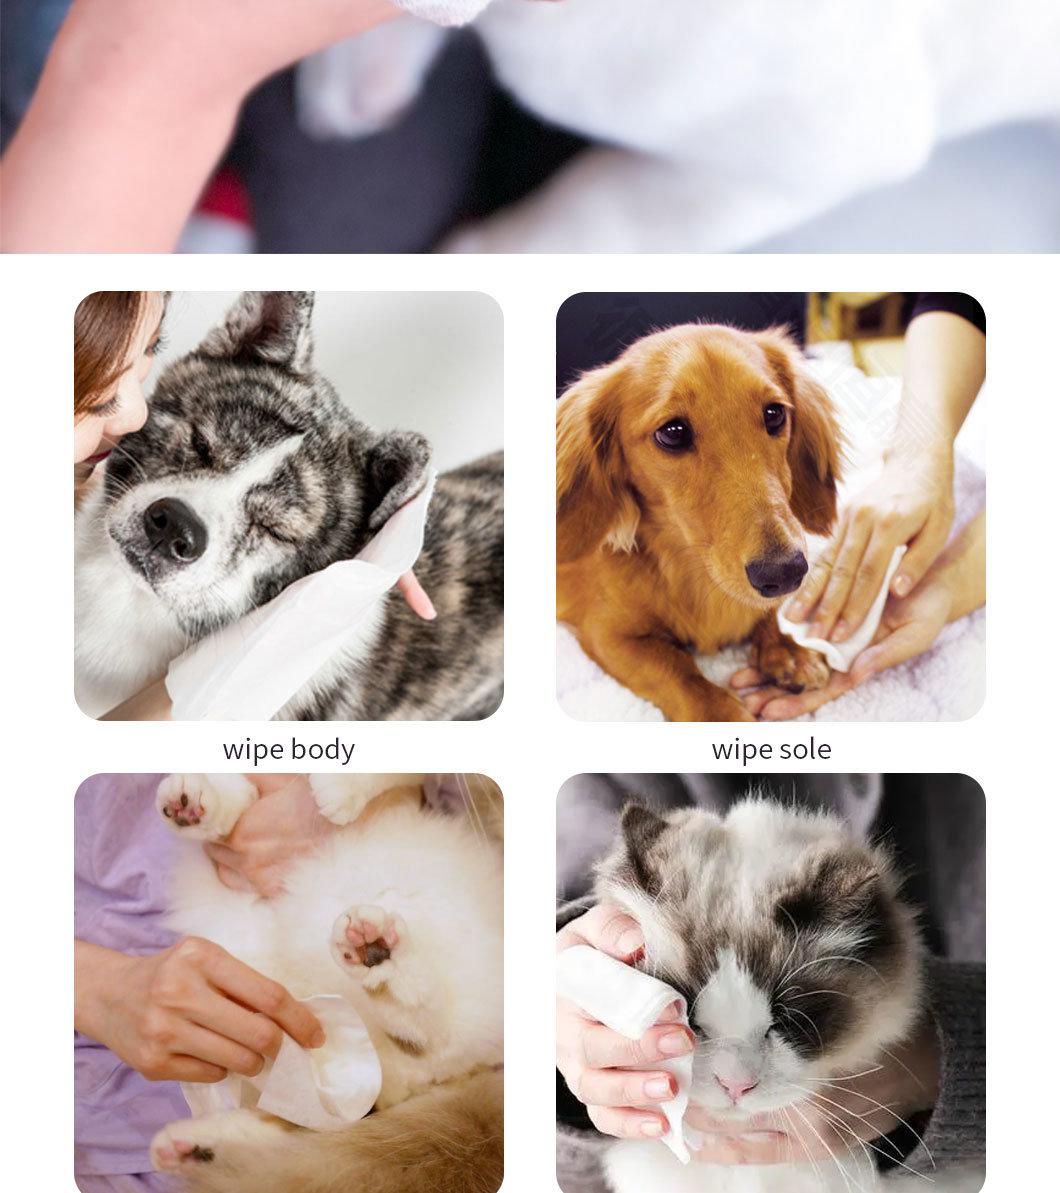 Provide The Most Safe and Reliable Care for Pets, OEM Brand Specifications and Formulas to Make The Most Appropriate Products